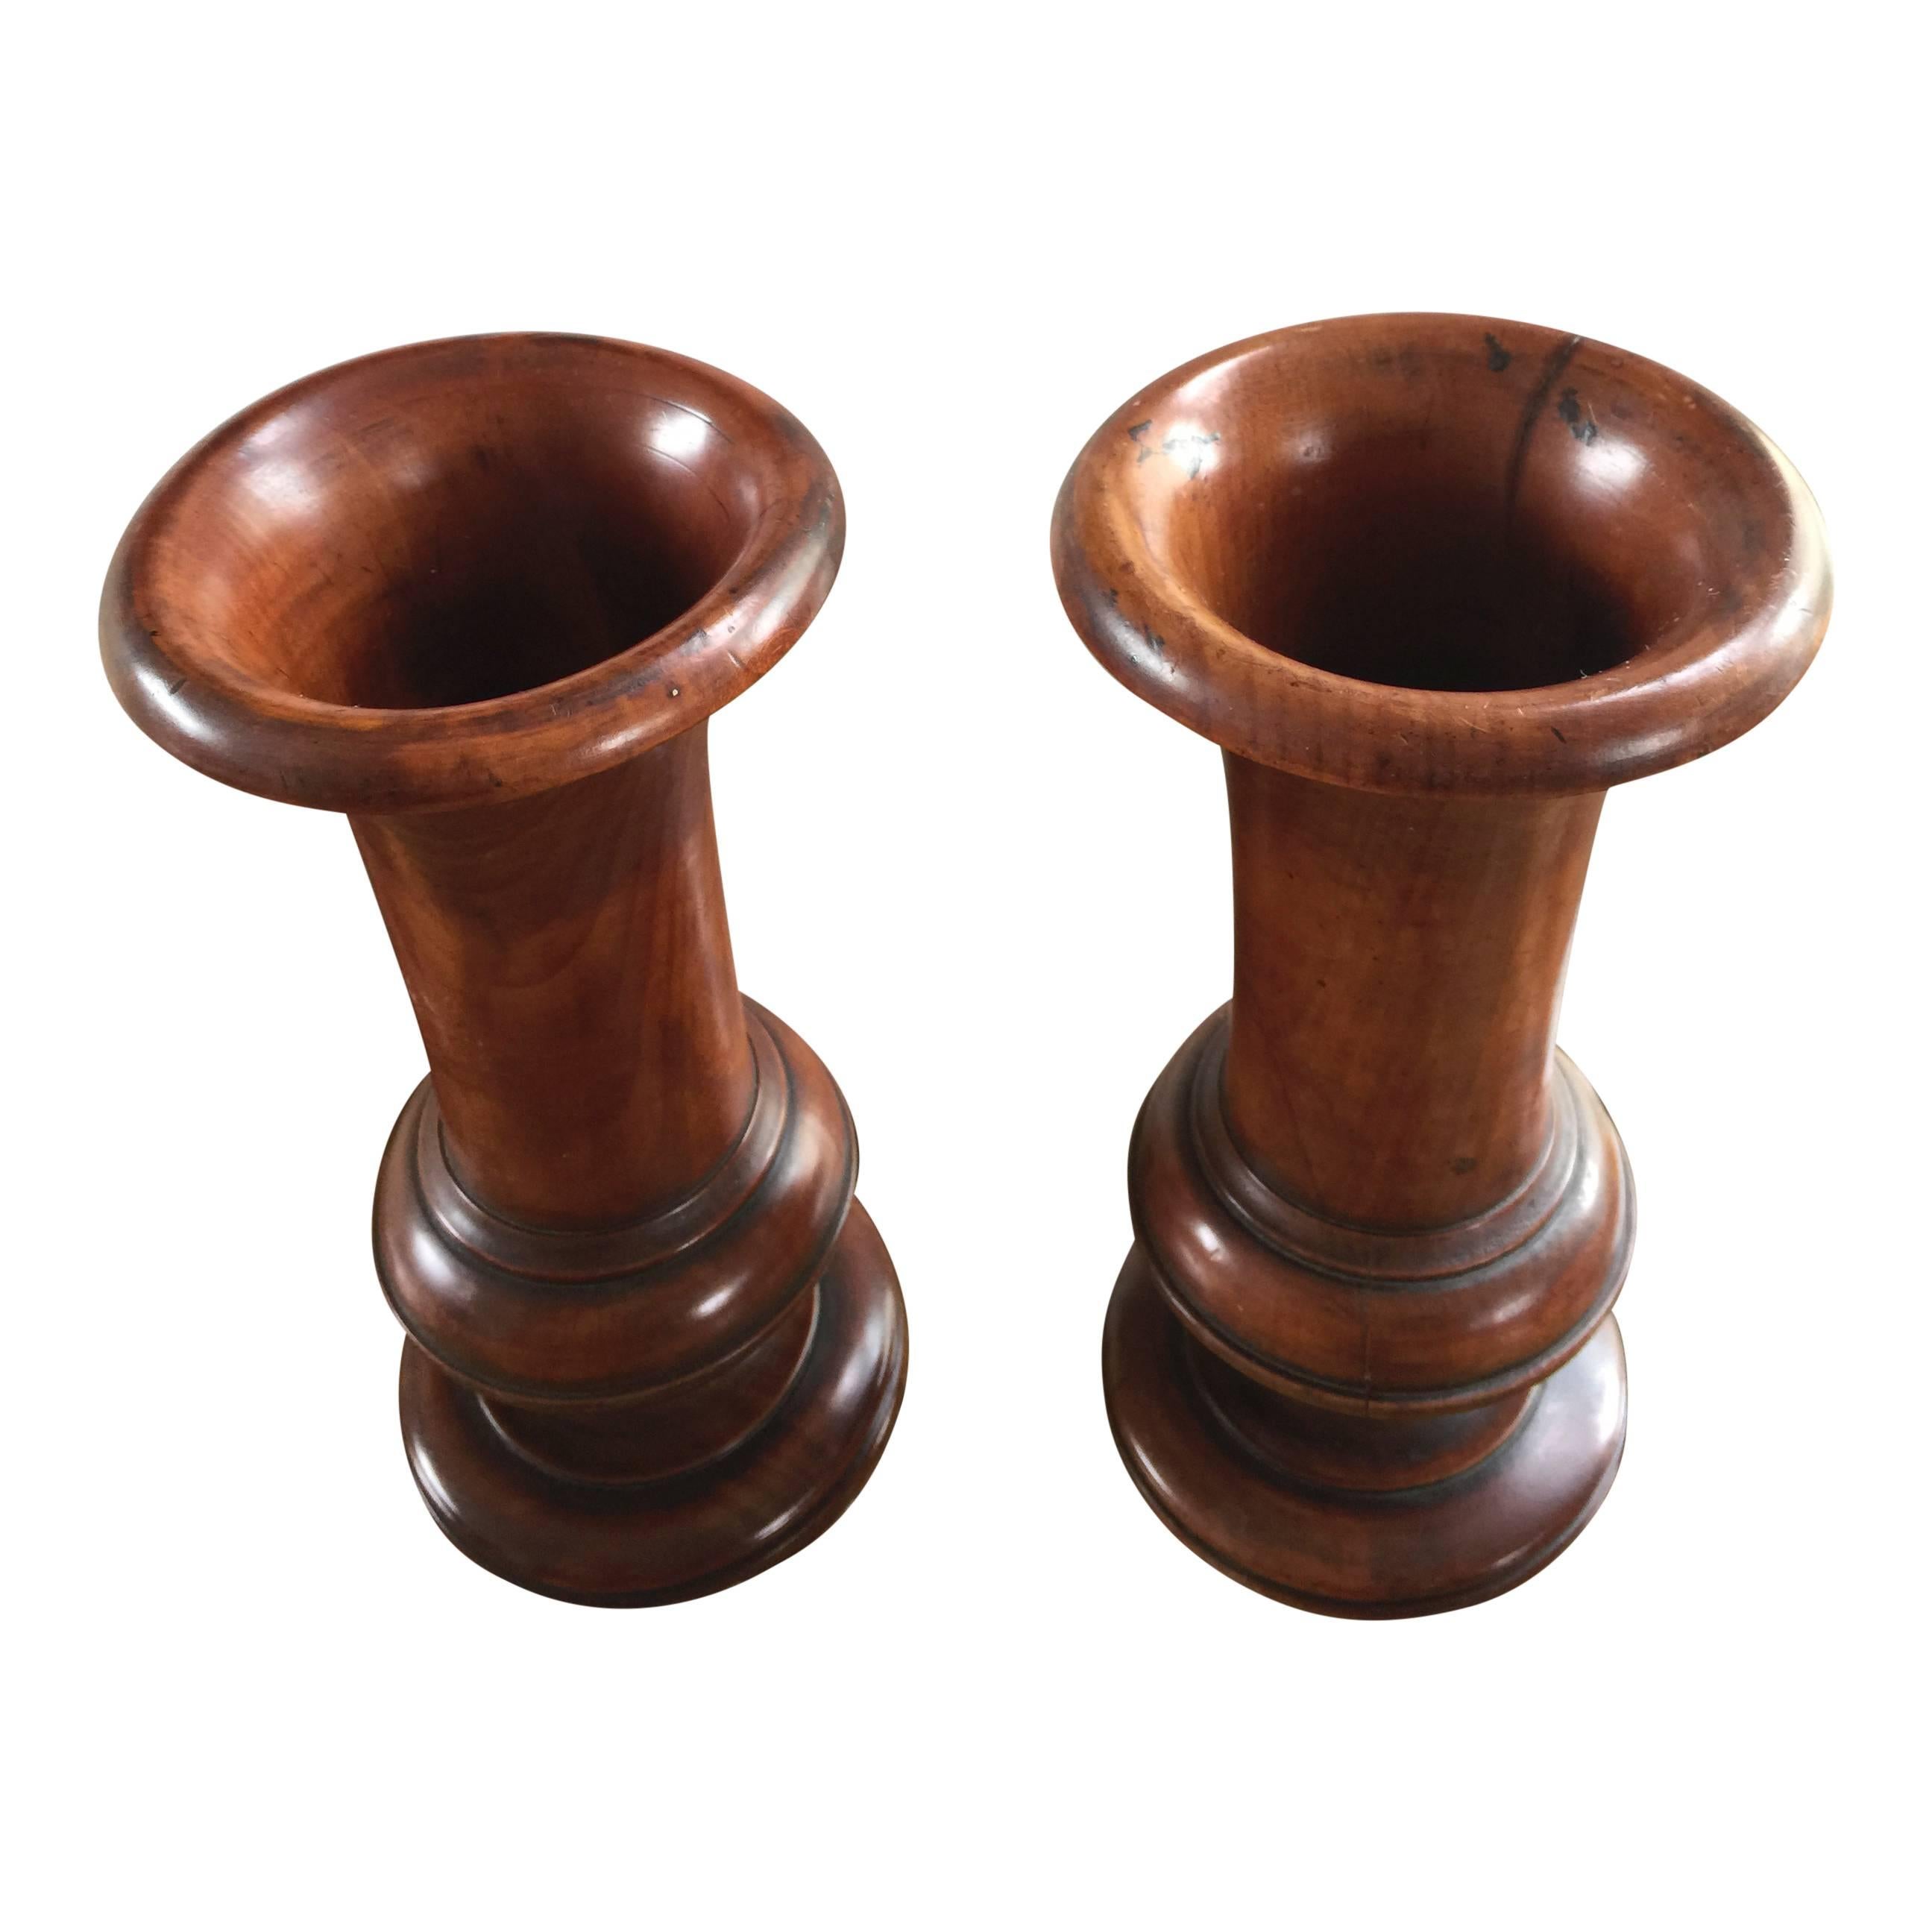 Wood Pair of Miniature Medici Style Cassolettes Vases, France, 1950s